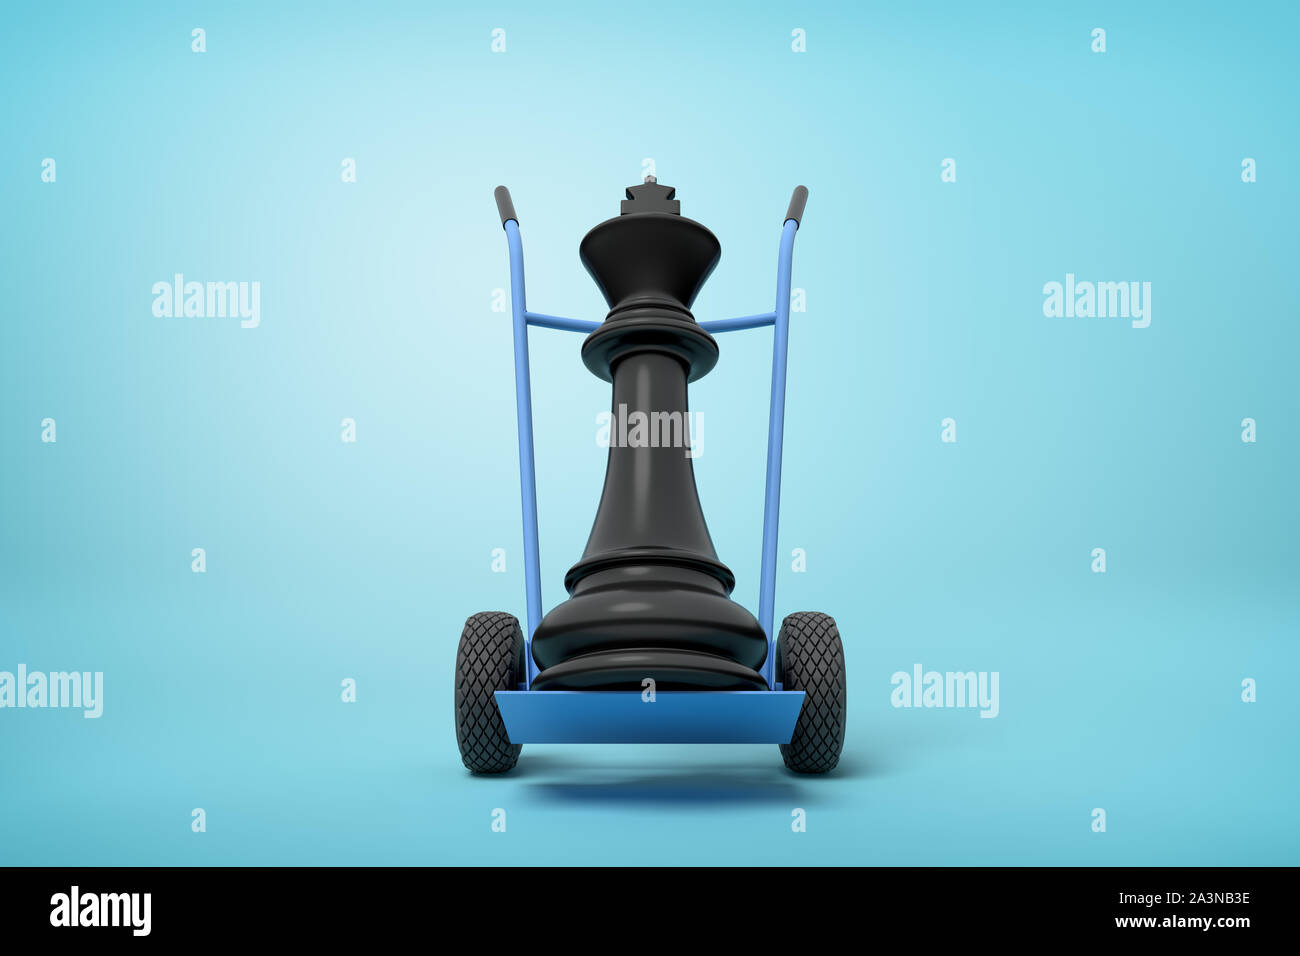 3d close-up rendering of black chess king on blue hand truck on light-blue background. Stock Photo